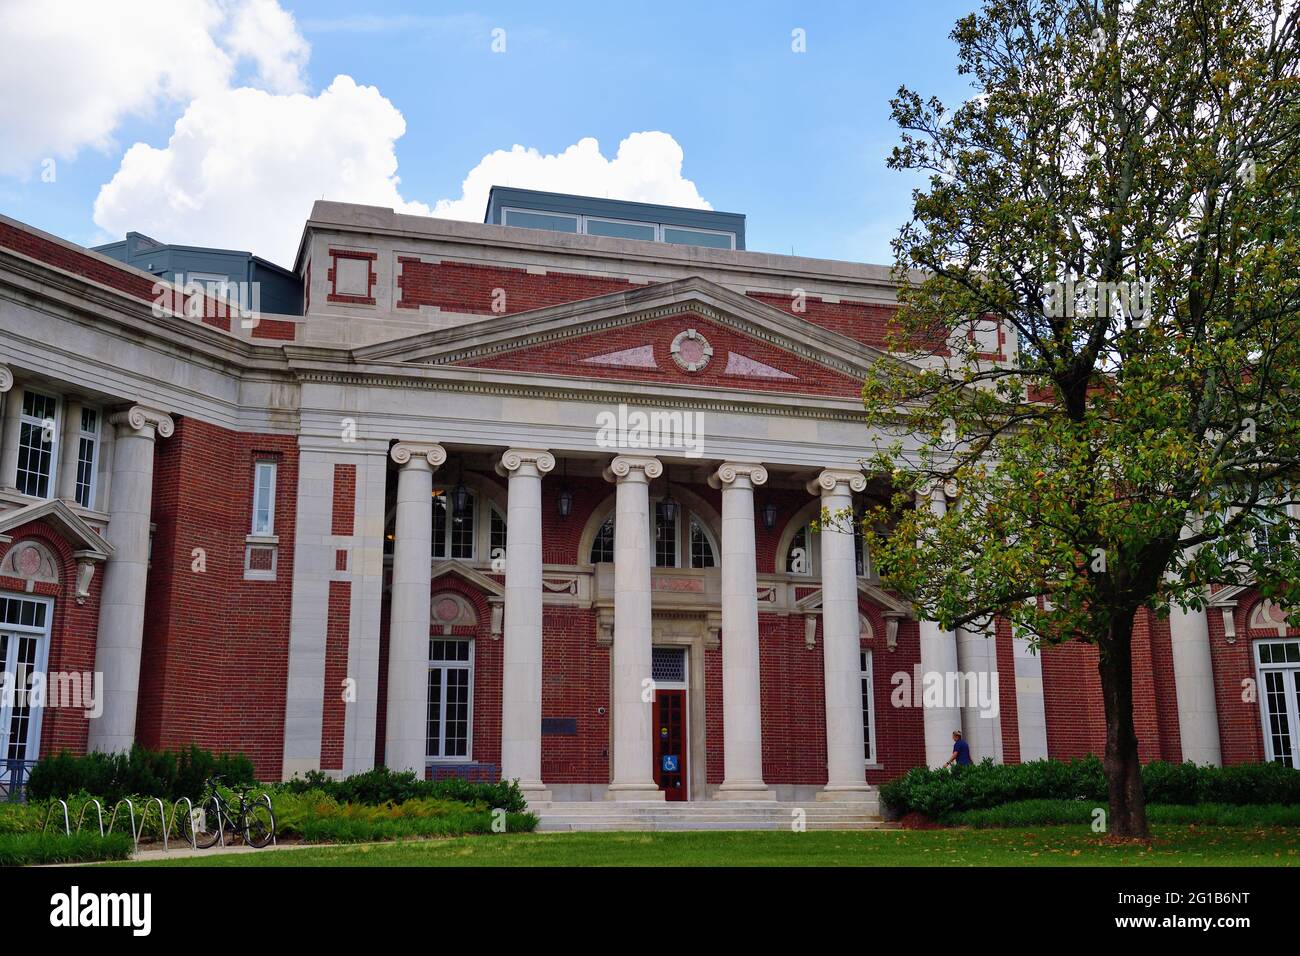 Nashville, Tennessee, USA. Academic buildings along Magnolia Circle on the campus of Vanderbilt University. Pictured is the Mayborn Building. Stock Photo